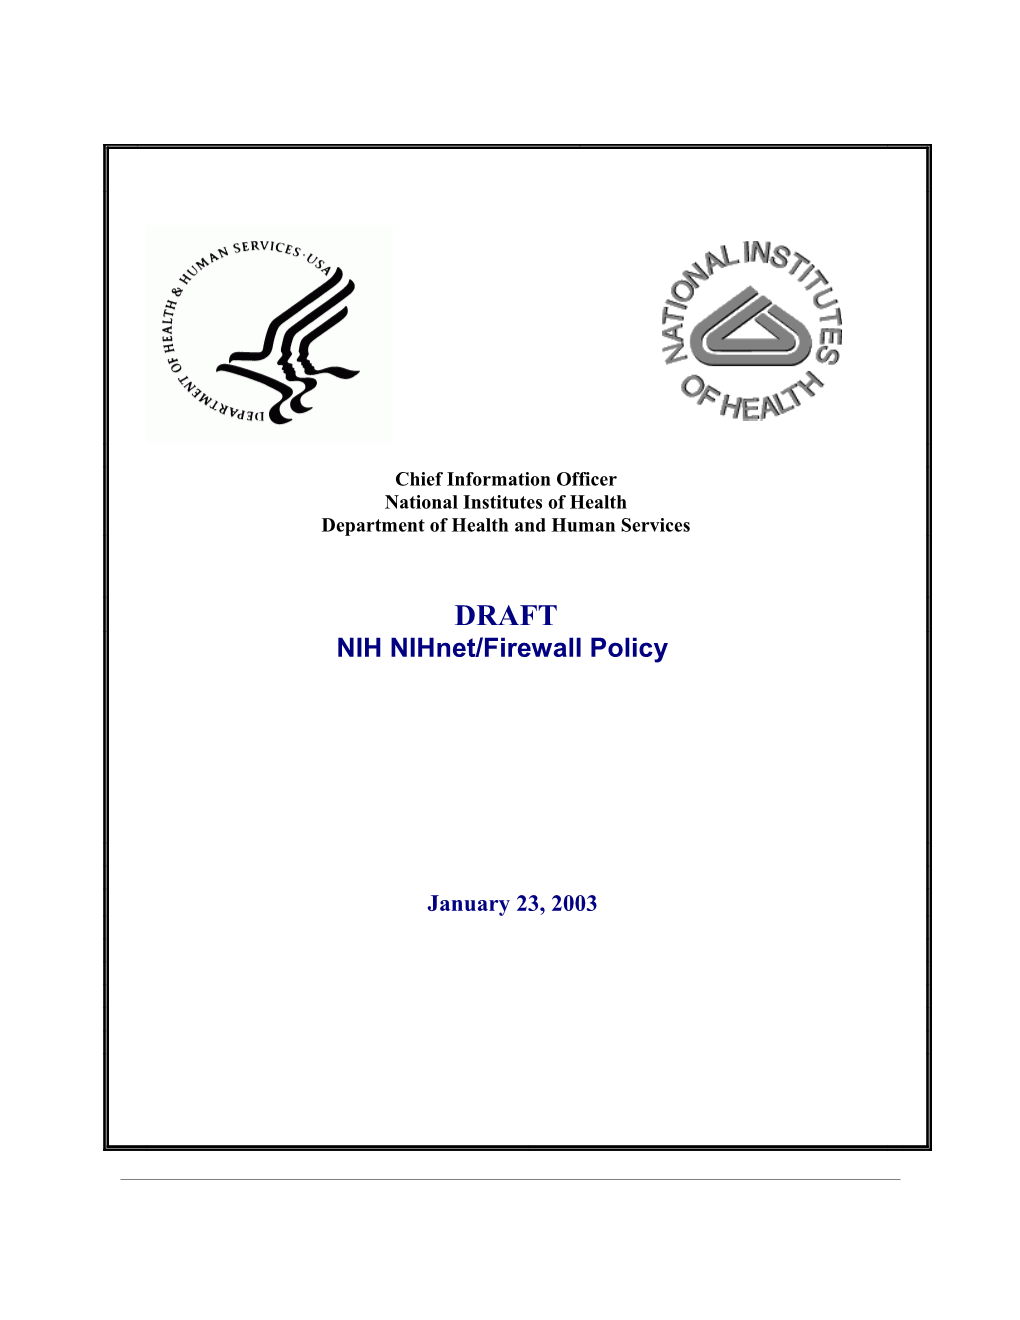 HHS IRM Policy for Domain Names January 8, 20011 of 9